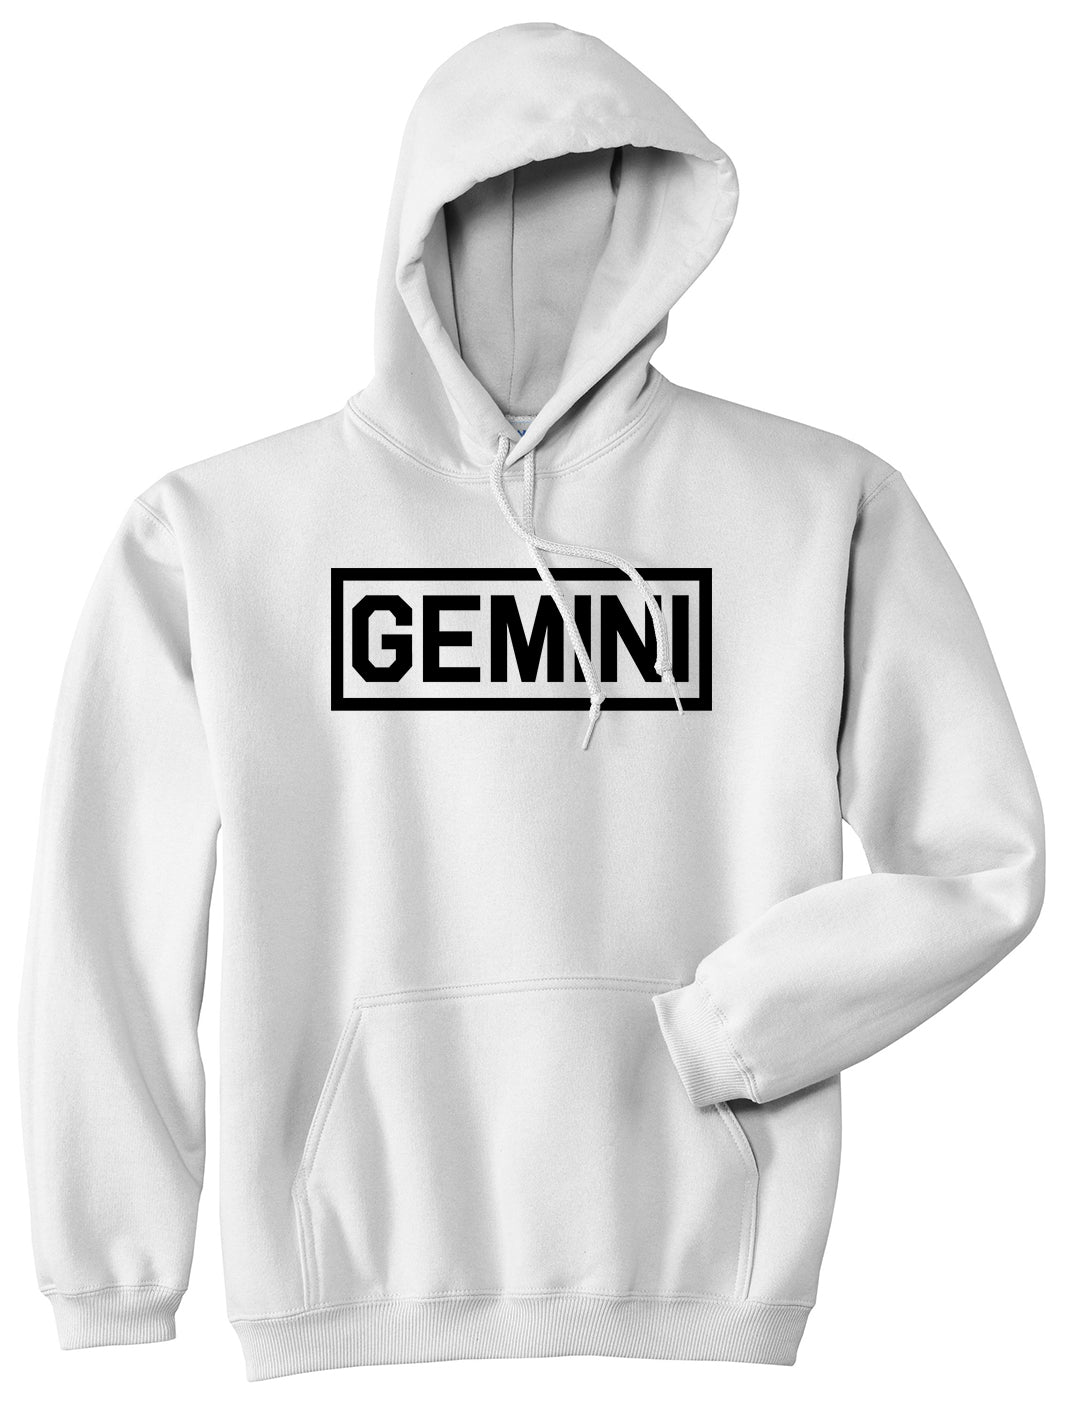 Gemini Horoscope Sign Mens White Pullover Hoodie by KINGS OF NY